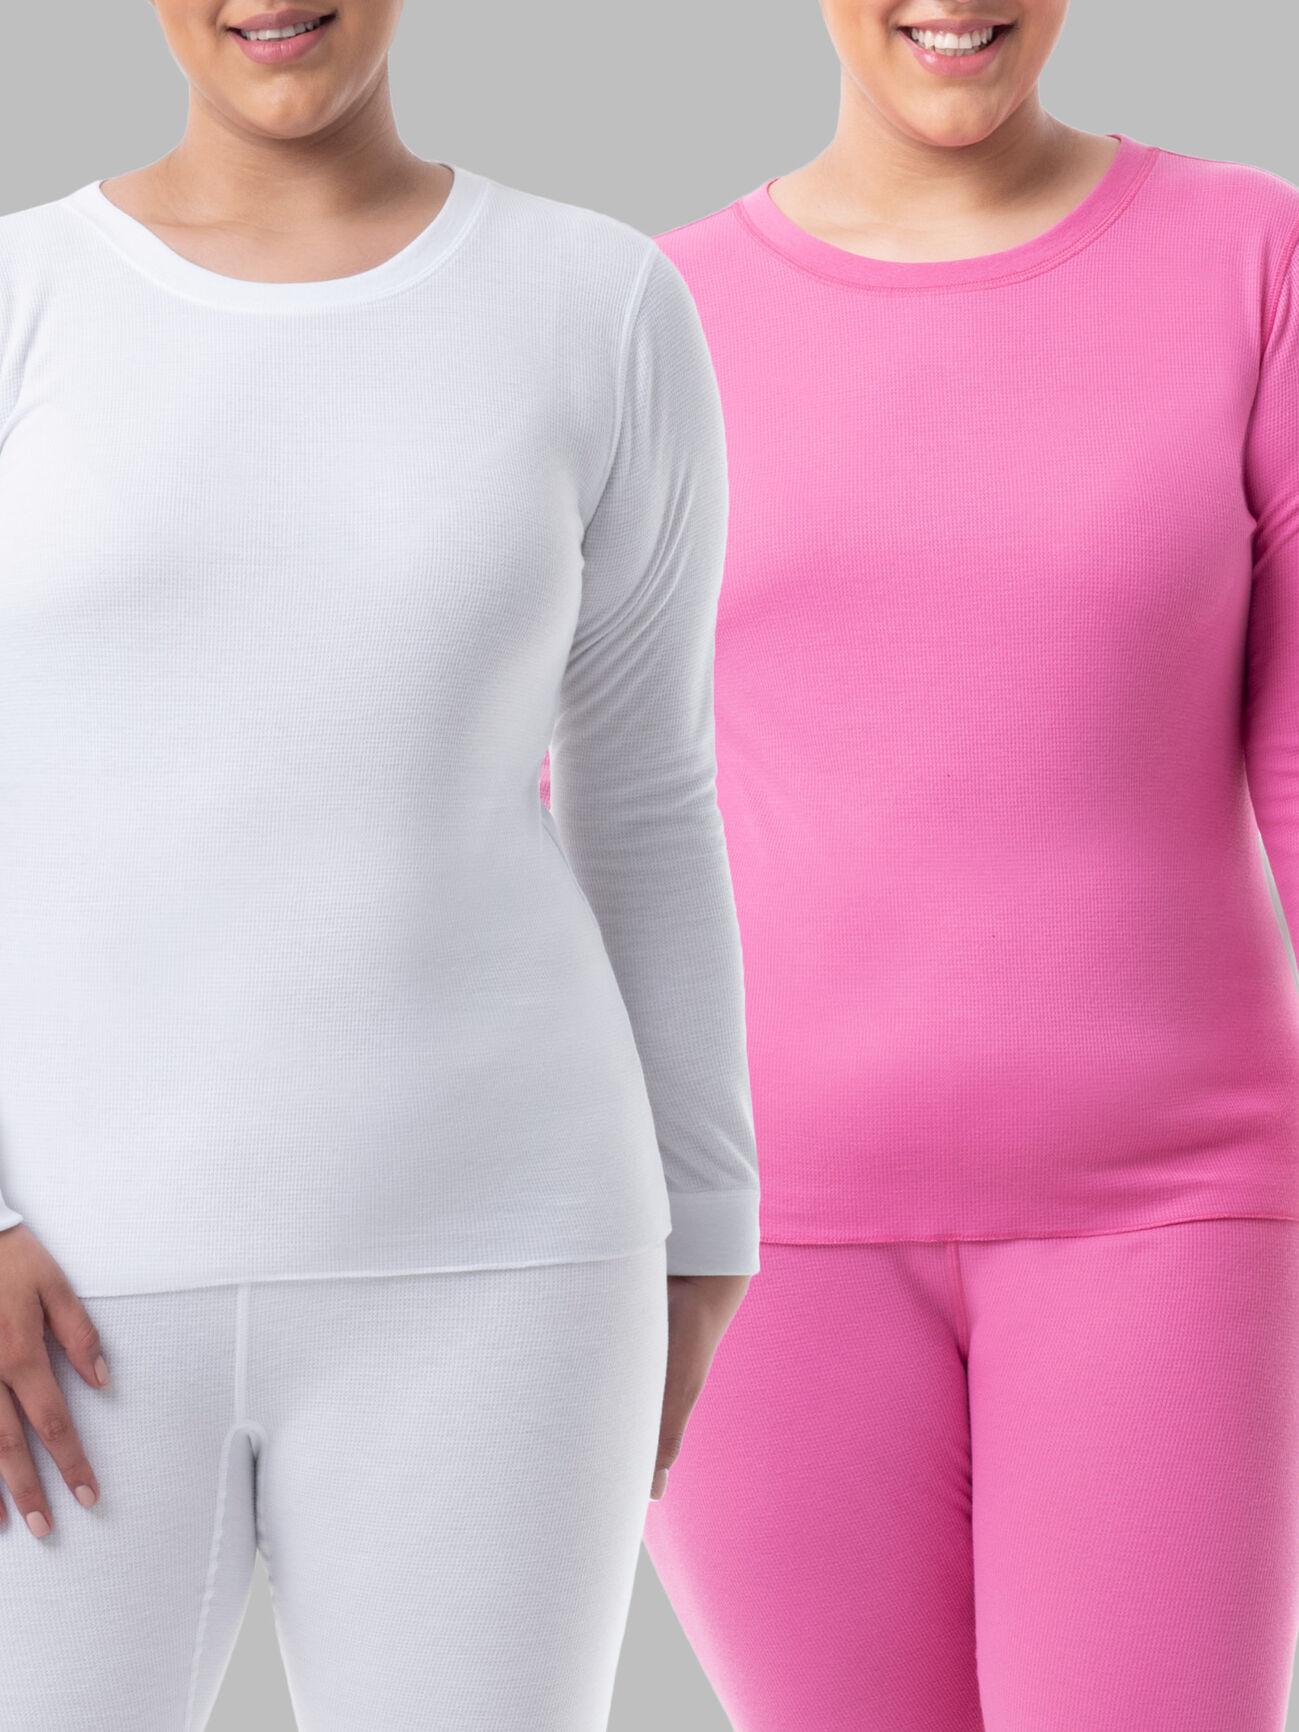 Fruit of the Loom Women's and Women's Plus Long Underwear Thermal Waffle  Top and Bottom Set